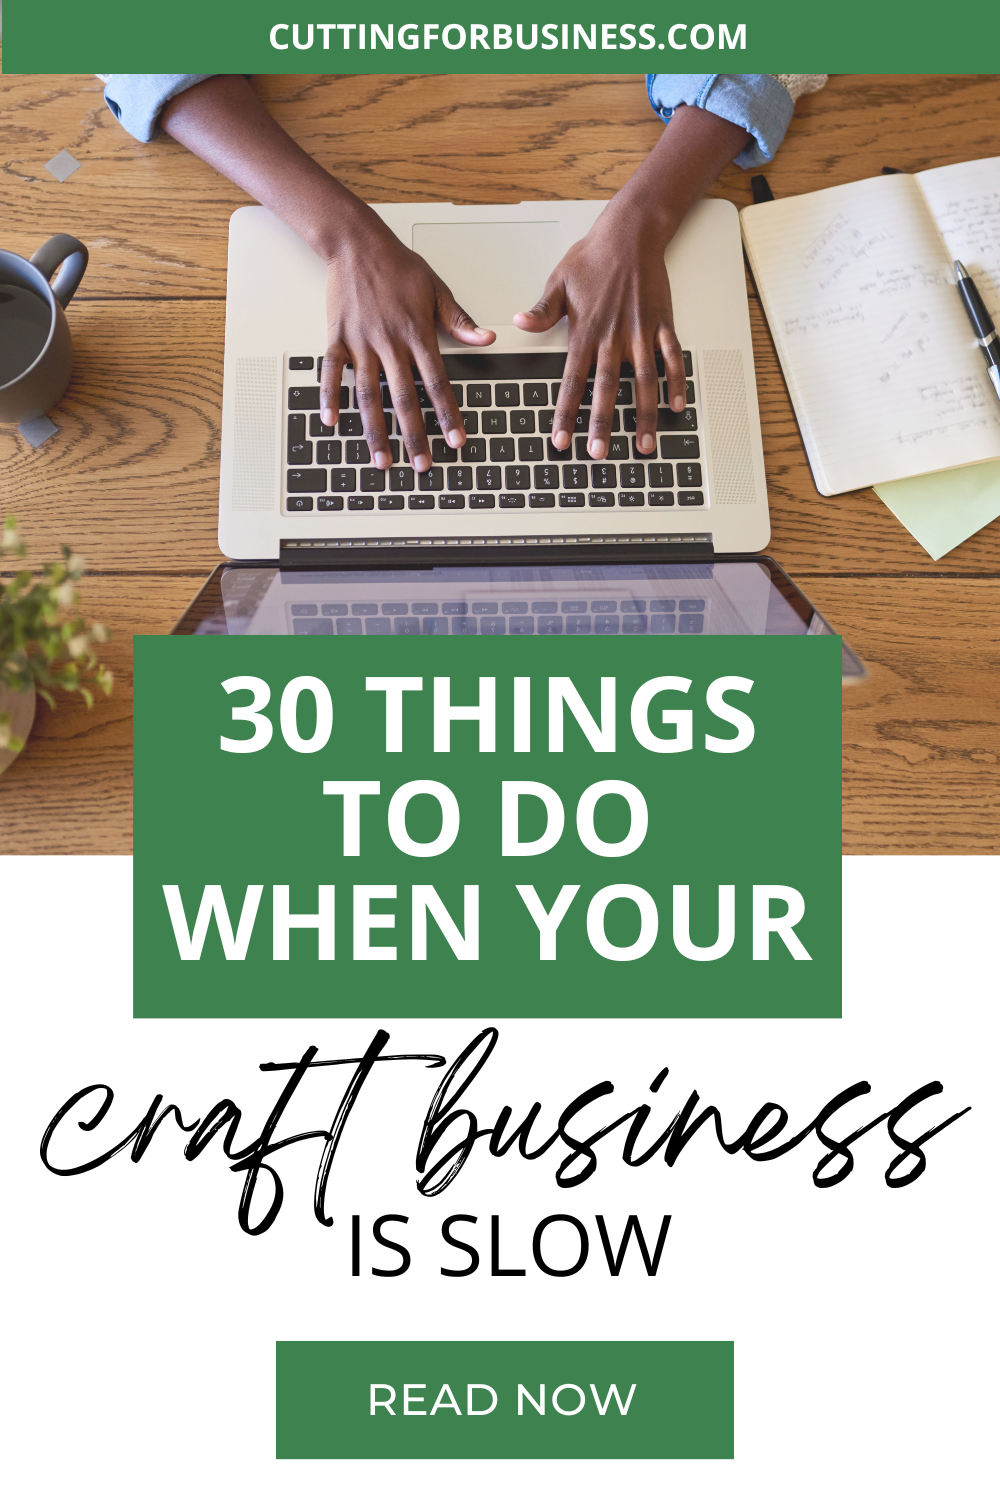 30 Things to Do When Your Craft Business is Slow - cuttingforbusiness.com